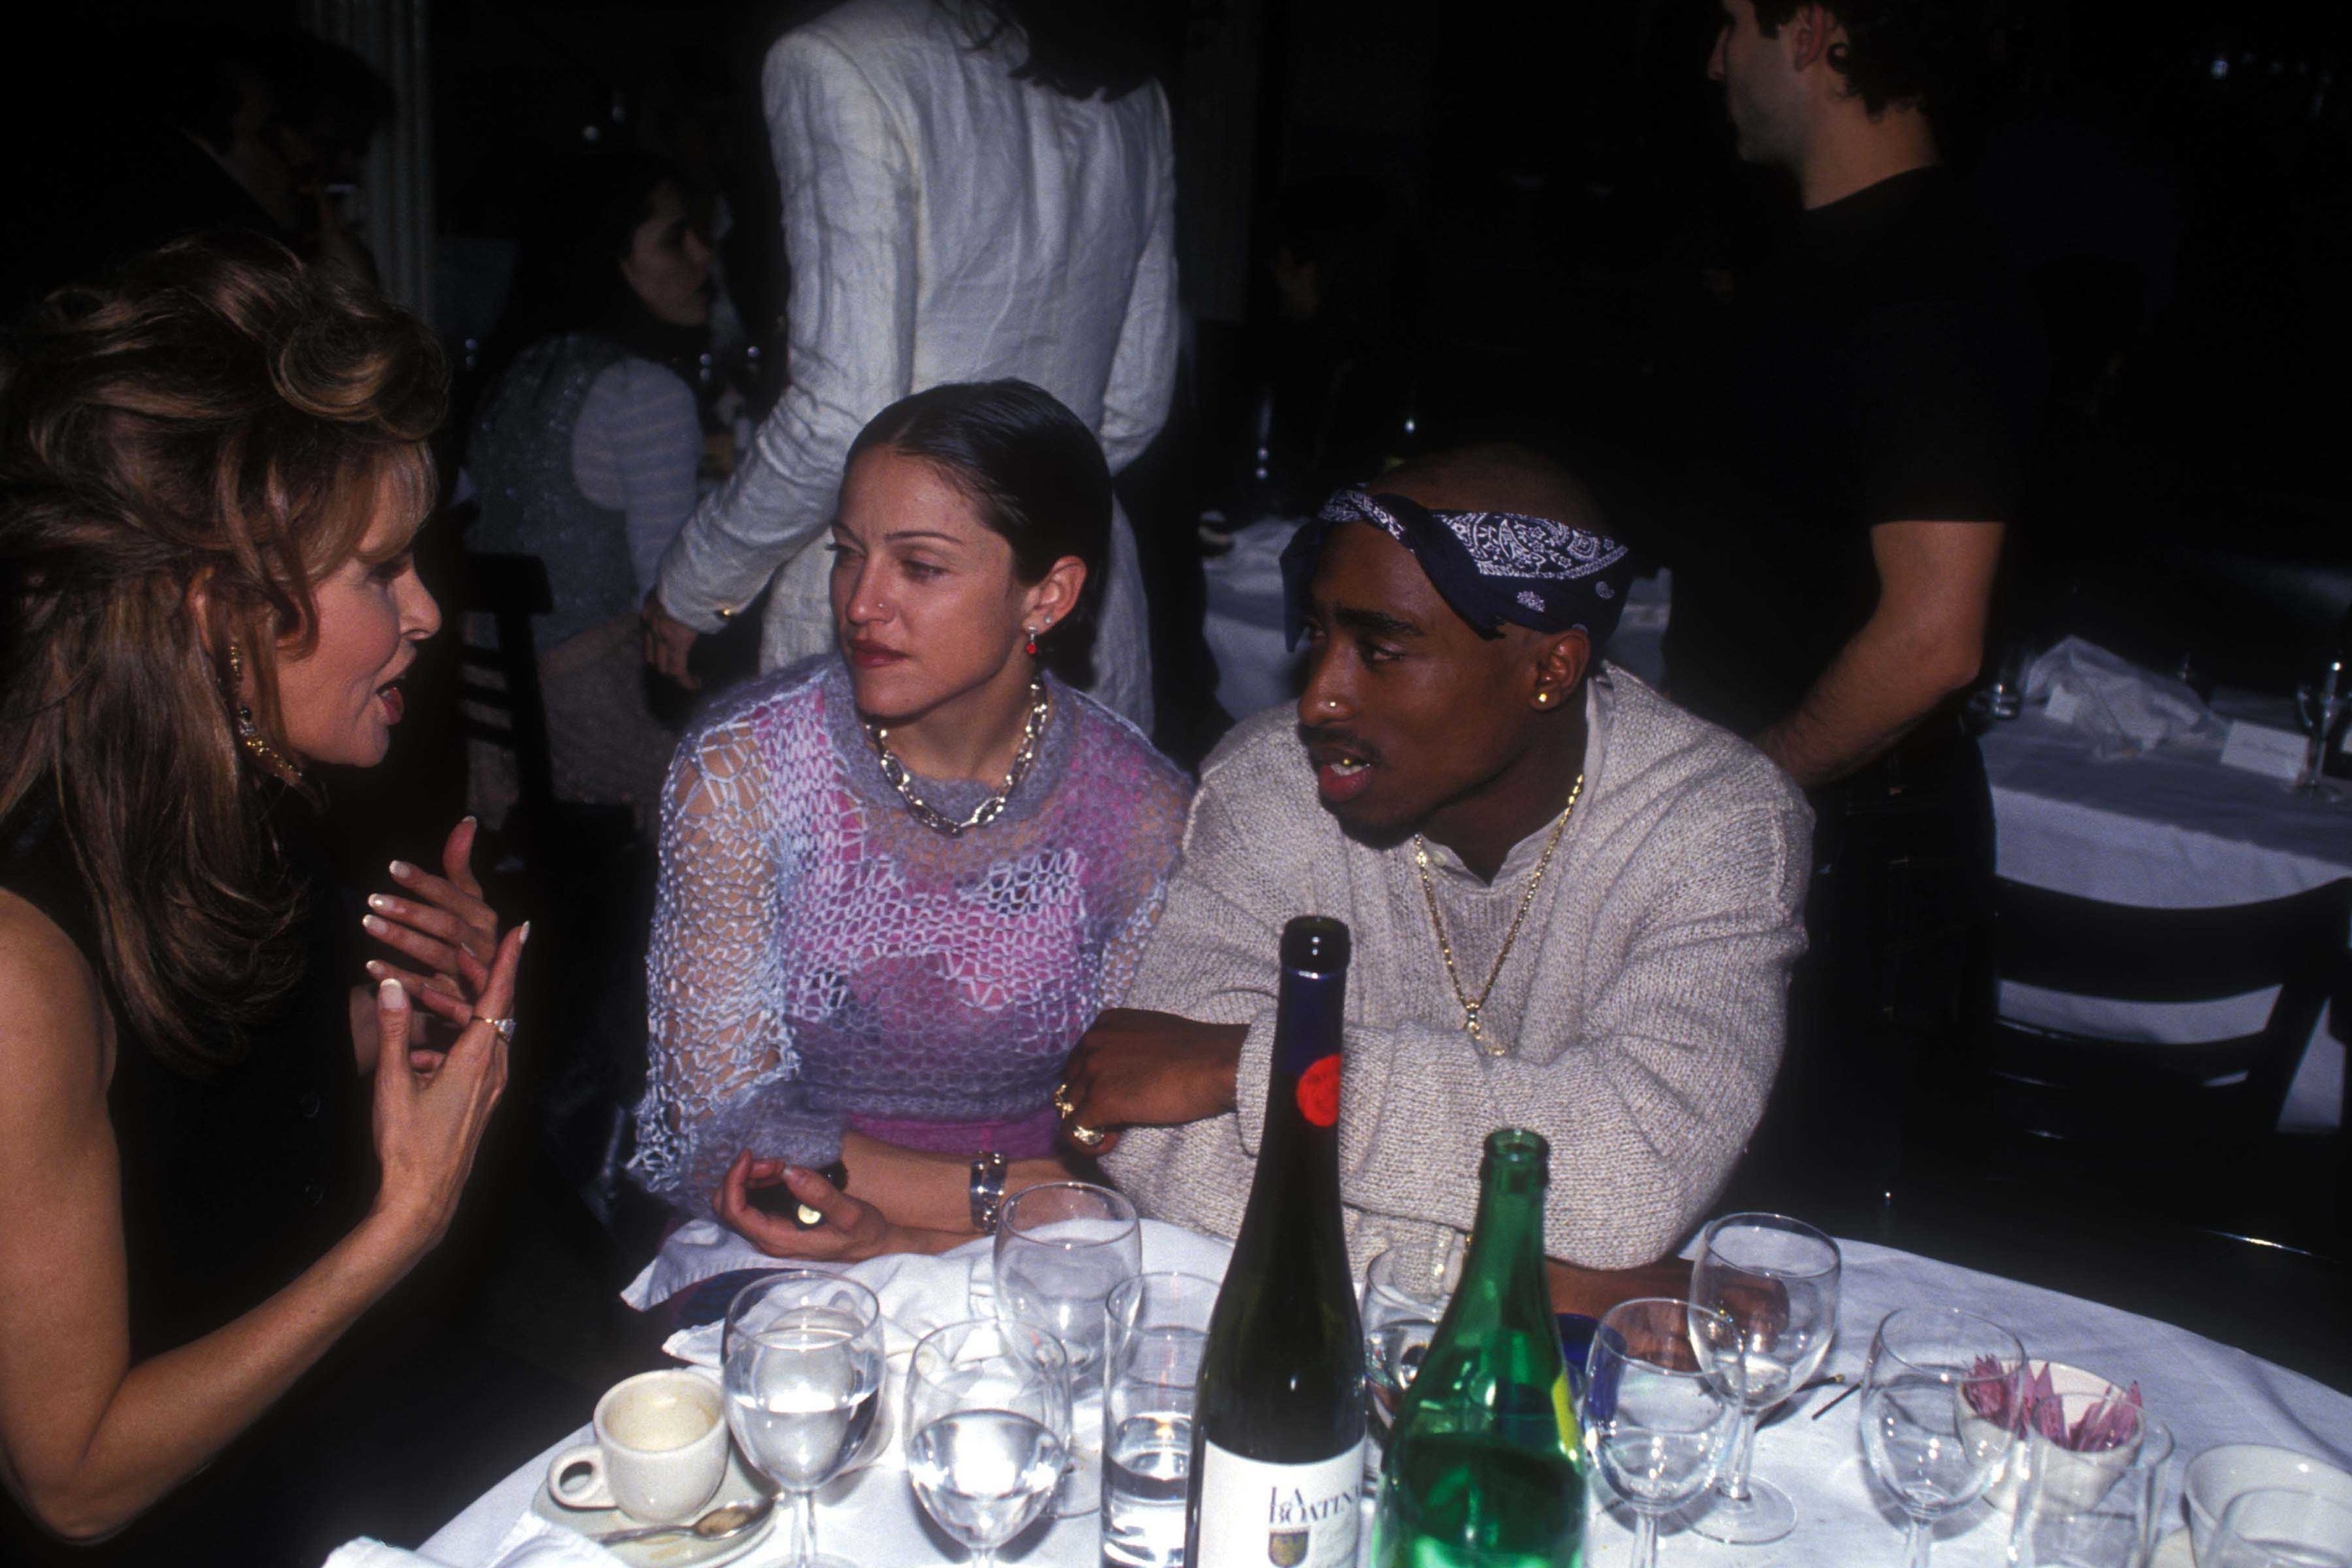 Madonna and Tupac Shakur at the Interview Magazine party in 1994 in New York City